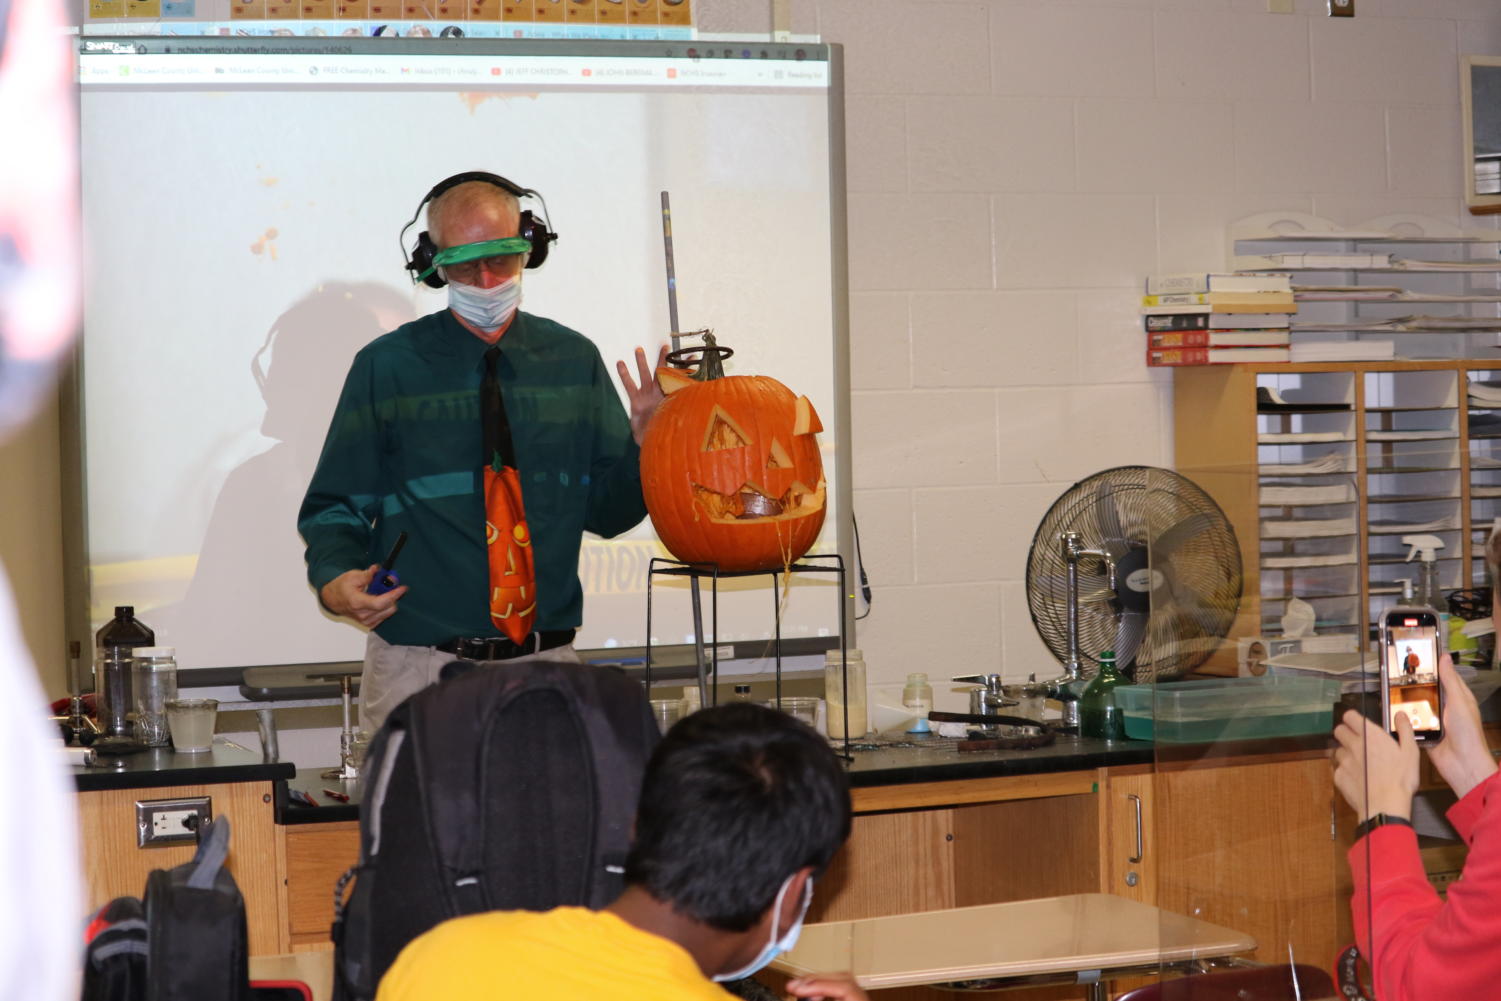 Mad+scientists%3A+Chemistry+teachers+demonstrate+Halloween-themed+experiments+%5Bphoto+gallery%5D